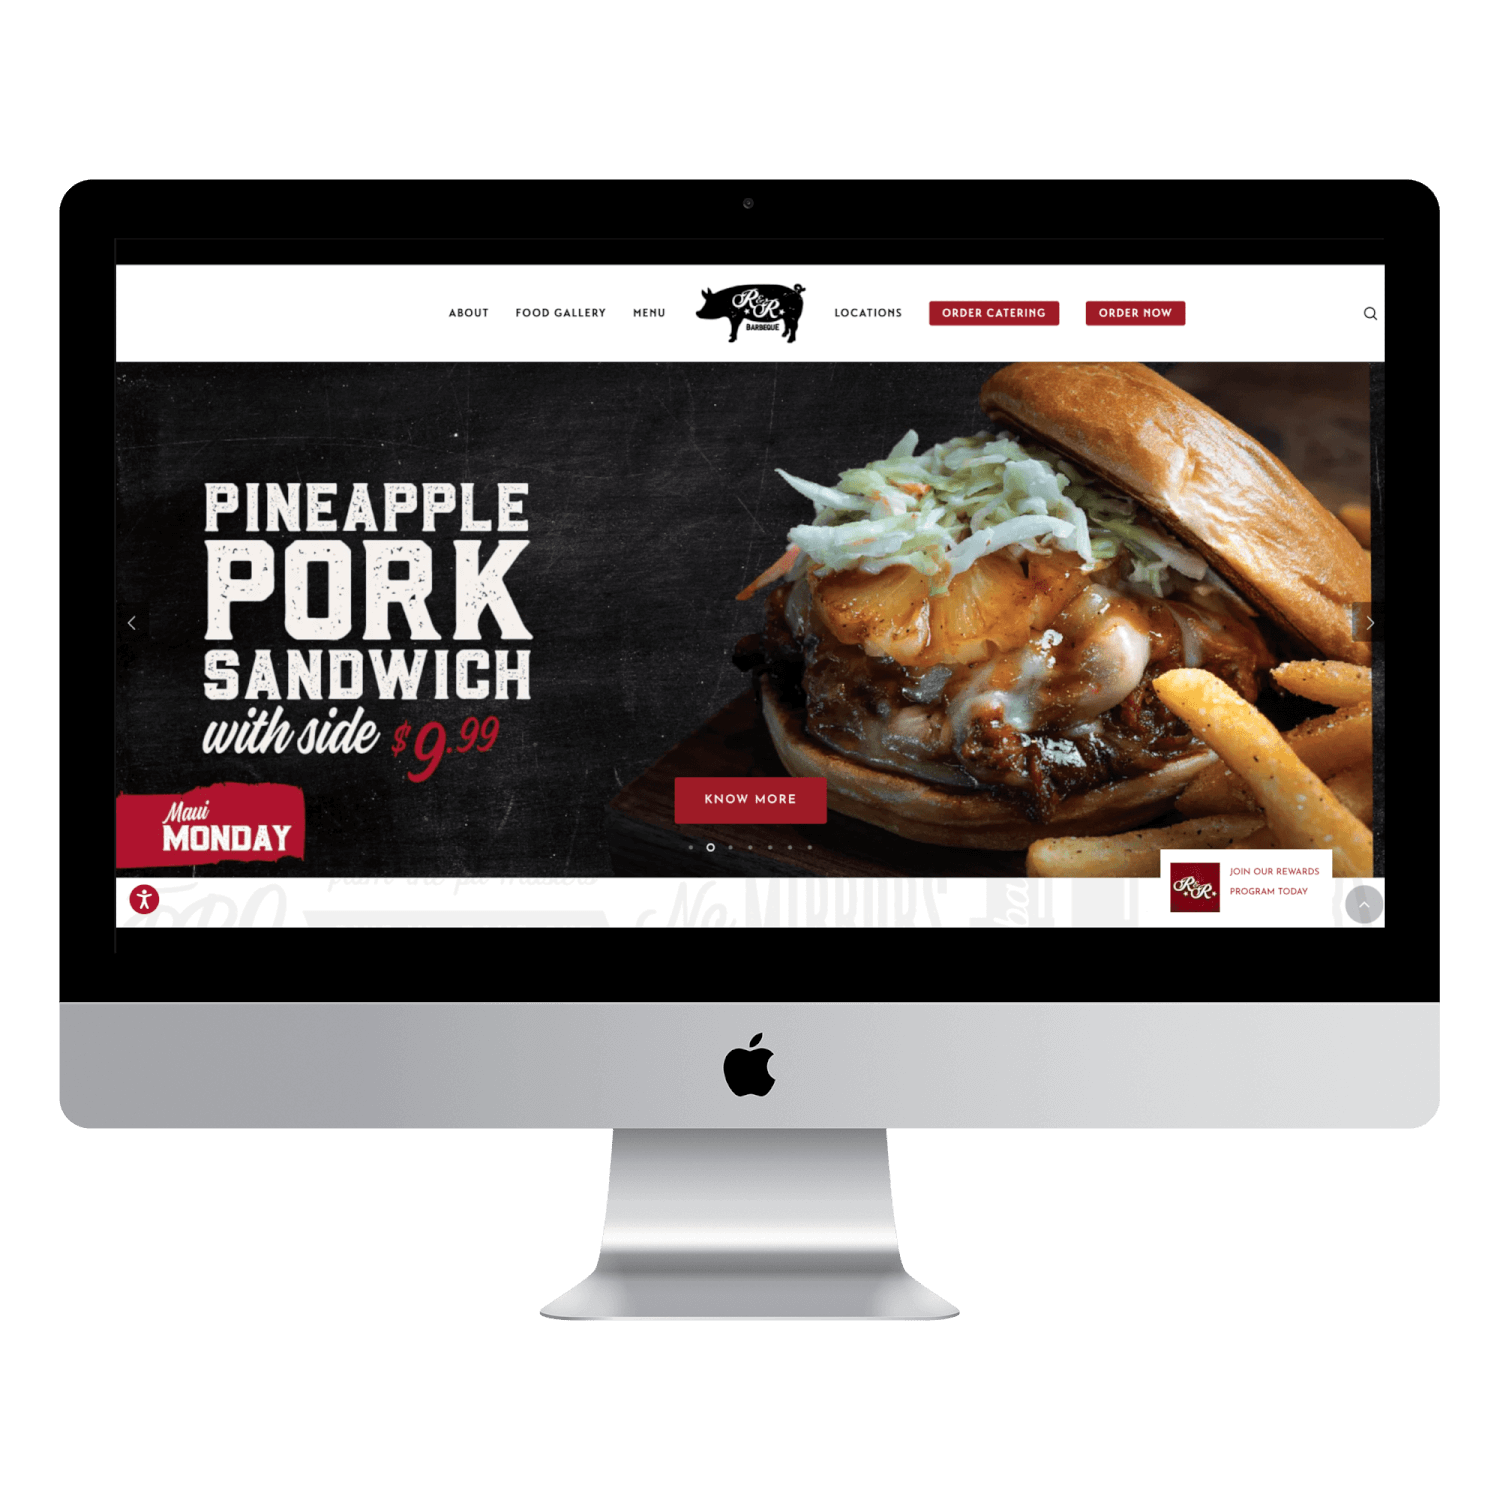 R&R front page mockup - website design service ecommerce building Big Red Jelly